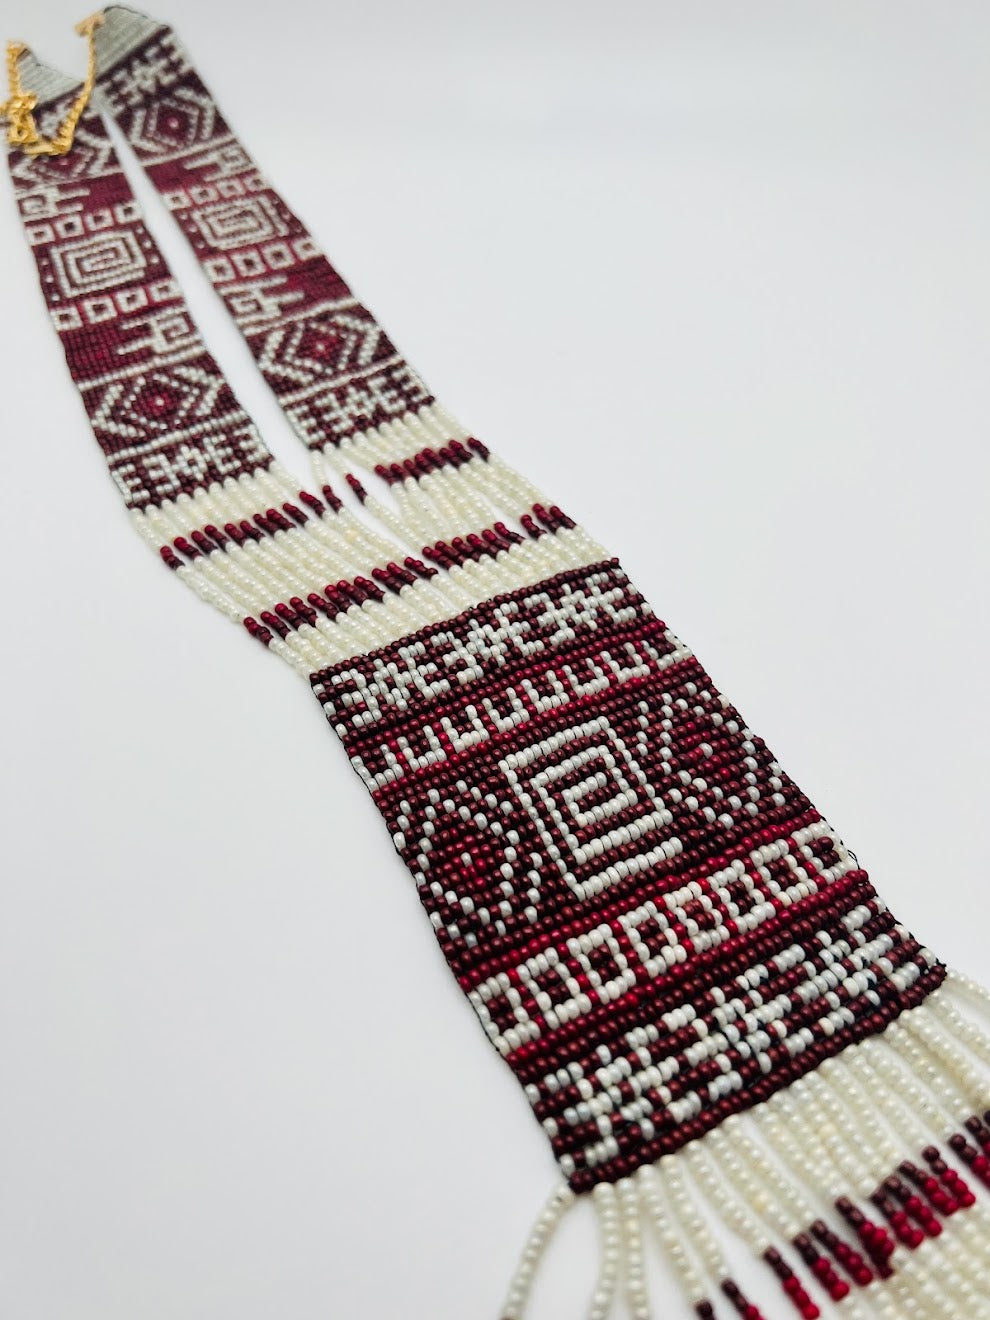 Red Wine & Off-white Geometric Design Loom Beaded Necklaces